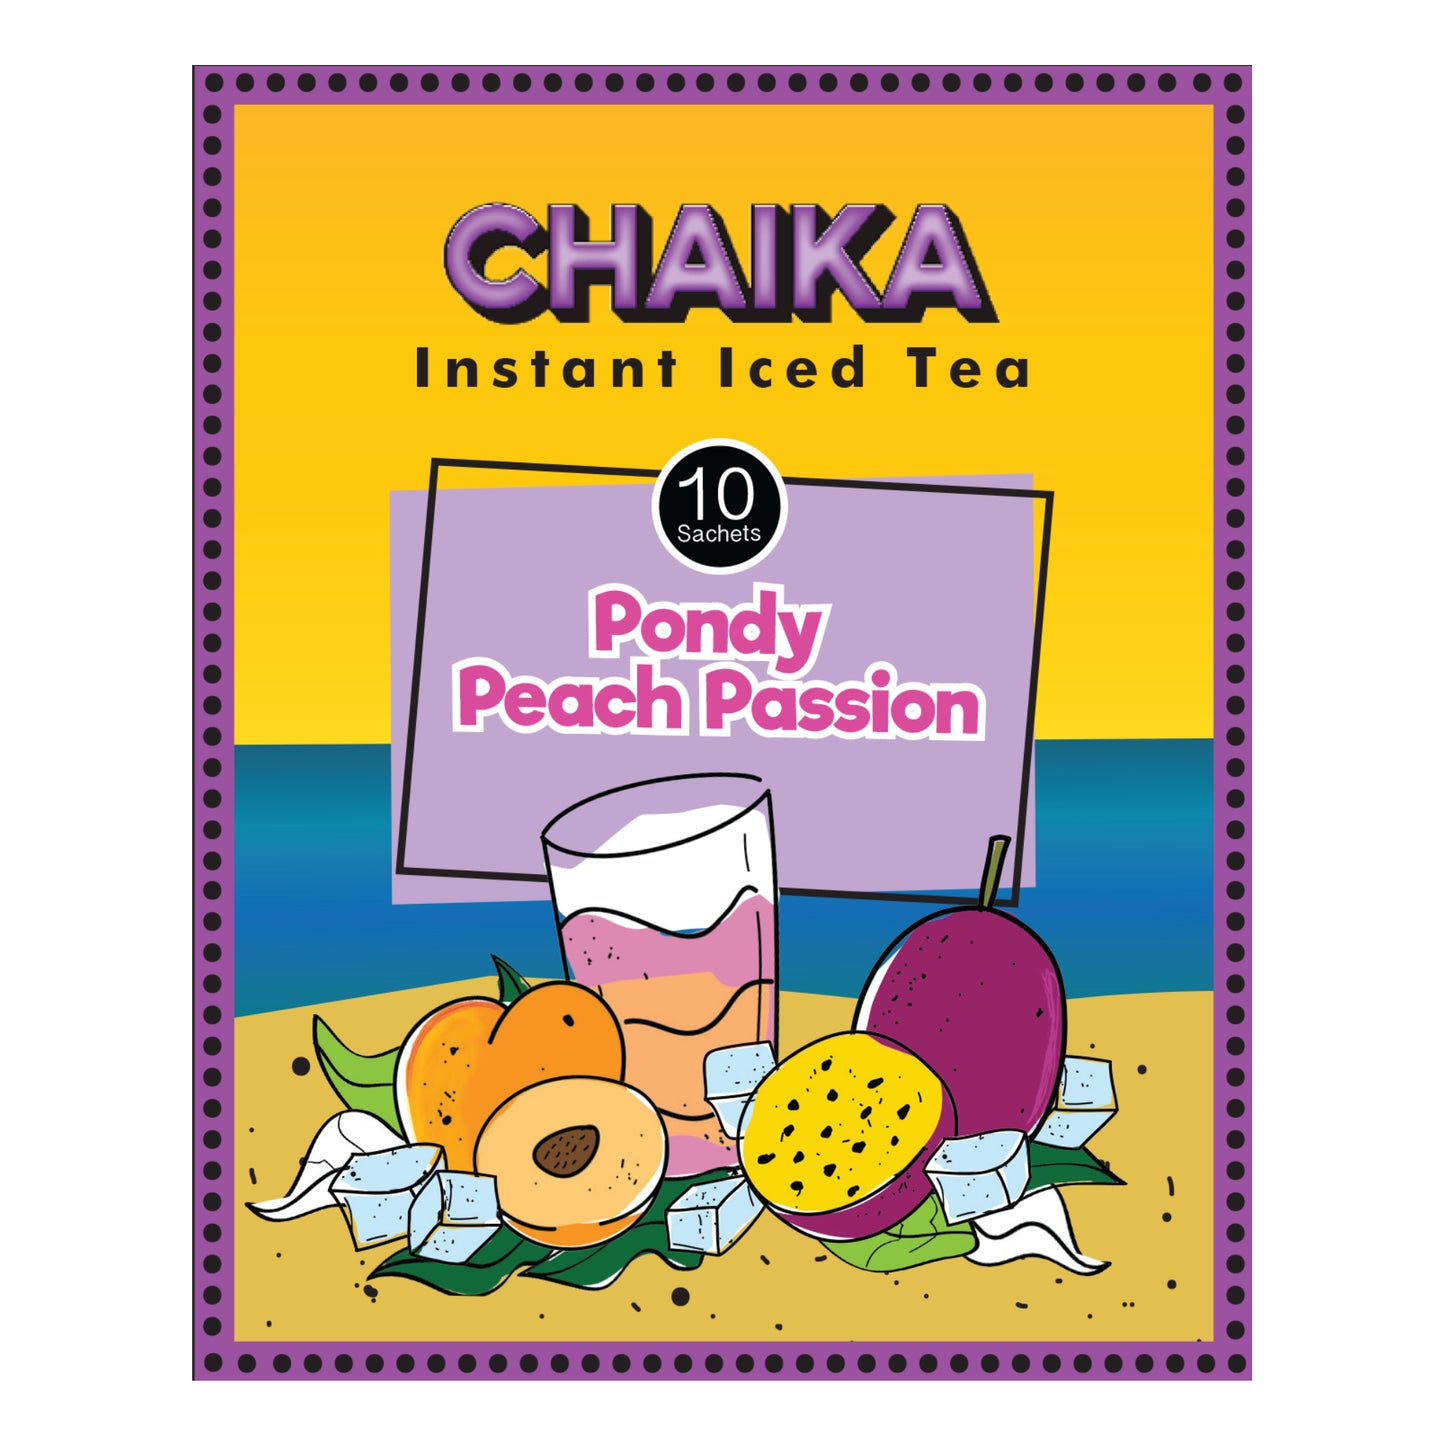 Iced tea combo Pack - Tropical Pineapple, Pondy Peach Passion Fruit & Mahabaleshwar Mixed Berry (30 Sachets)